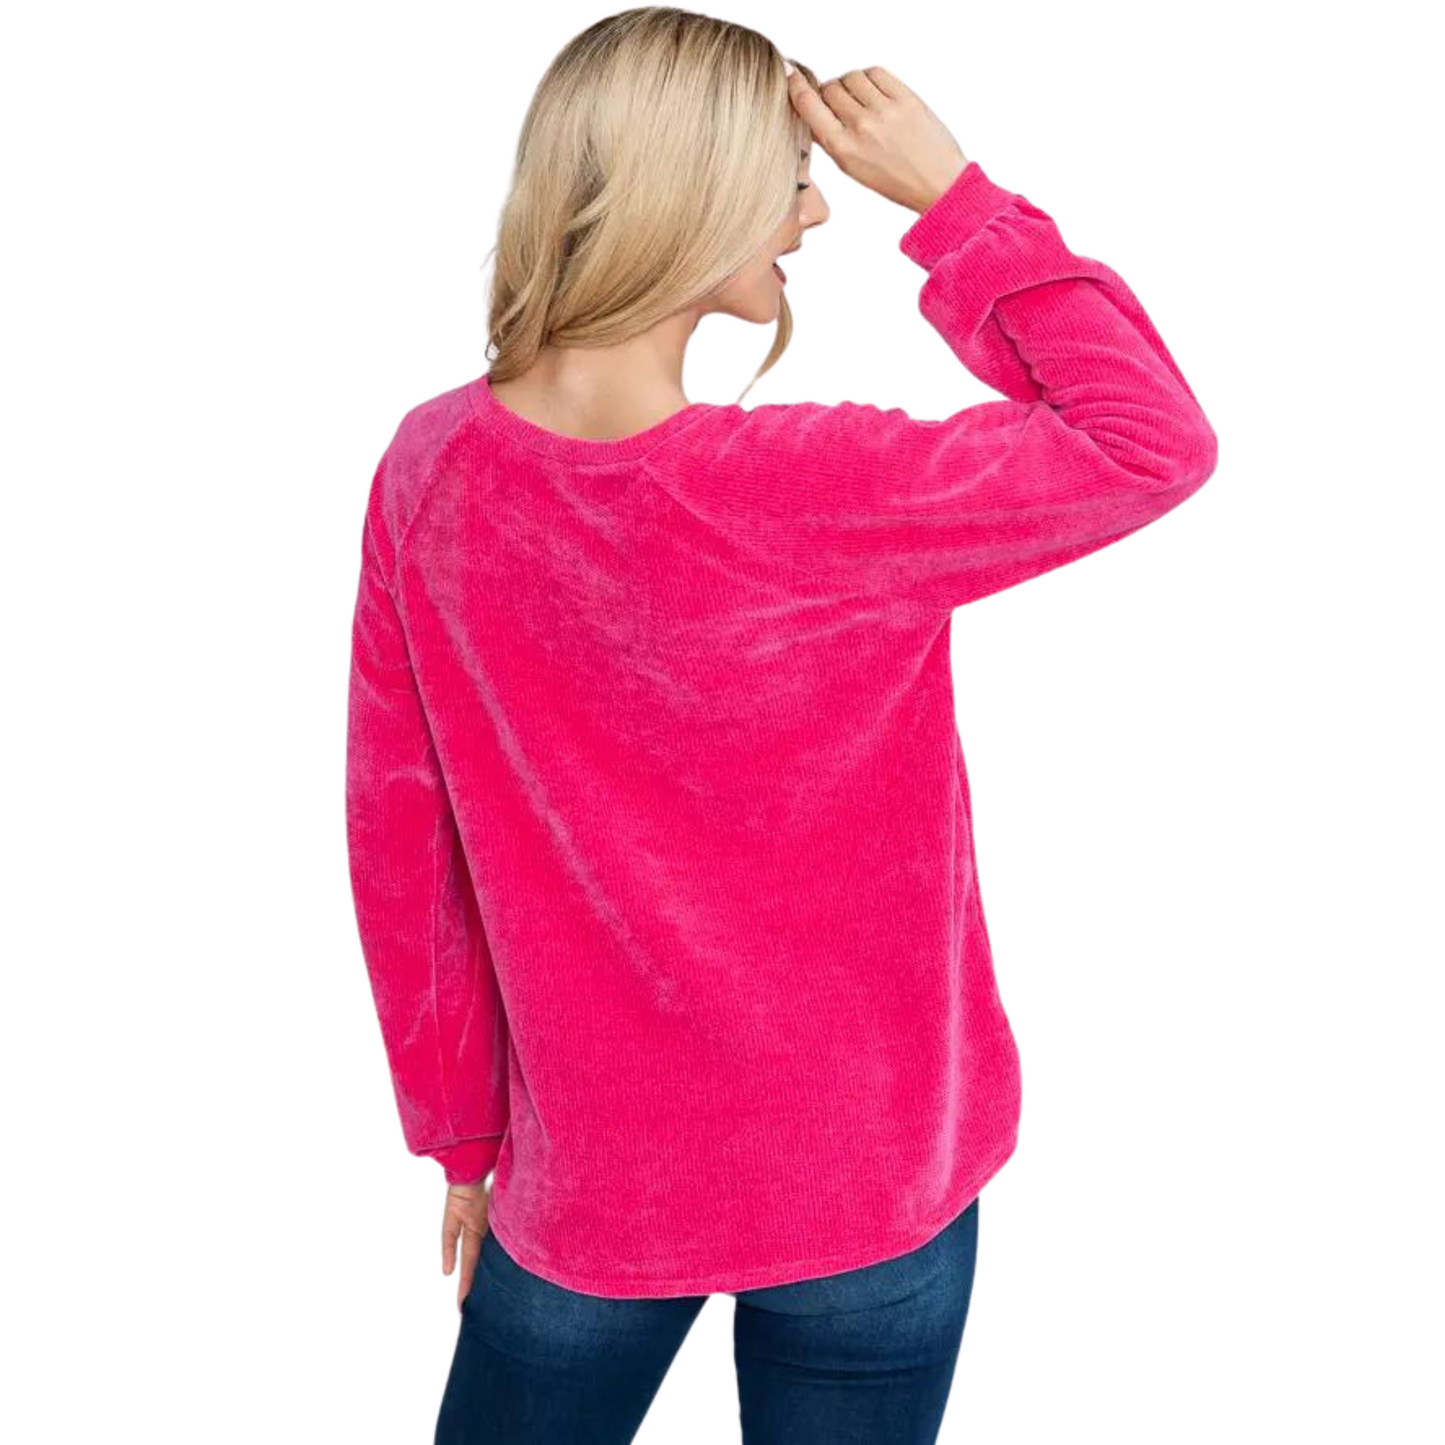 This timeless classic from Hesed Brand is perfect for any day or night out. Crafted with a soft, ribbed material and featuring a fuchsia hue, this stylish scoop neck sweater will quickly become your favorite.